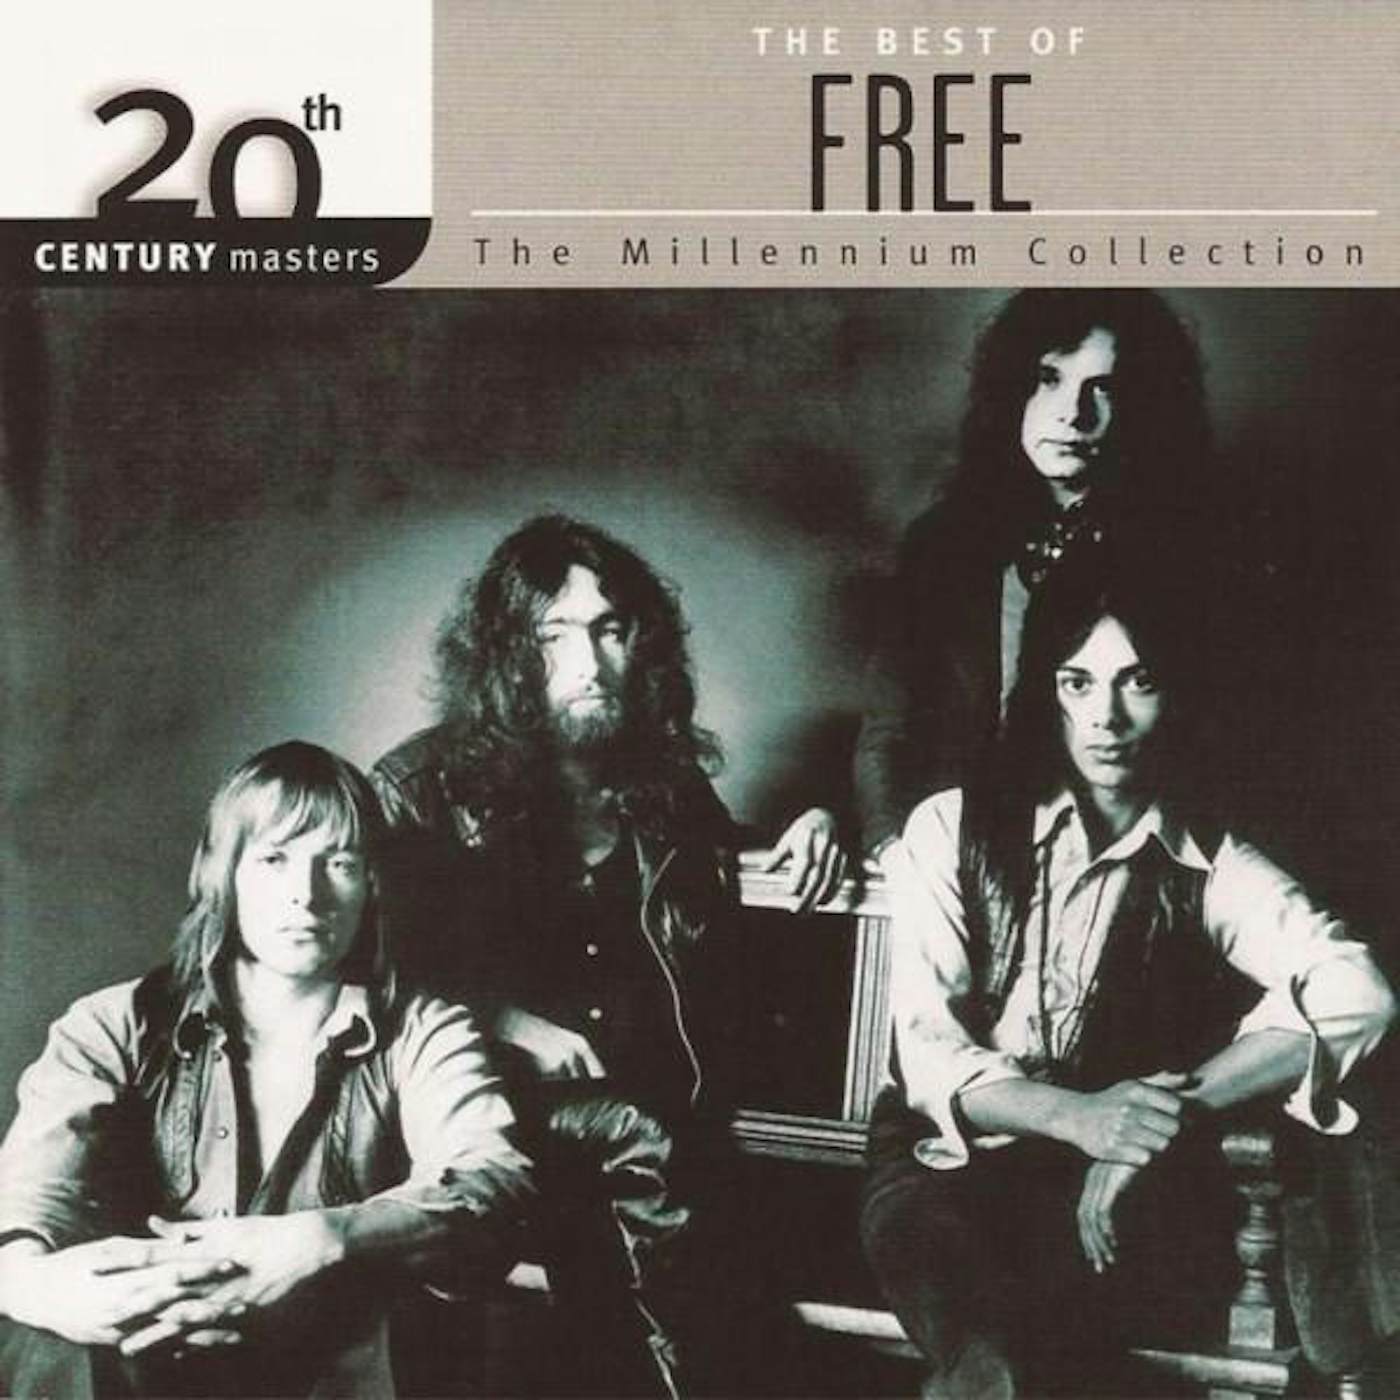 Free MILLENNIUM COLLECTION: 20TH CENTURY MASTERS CD